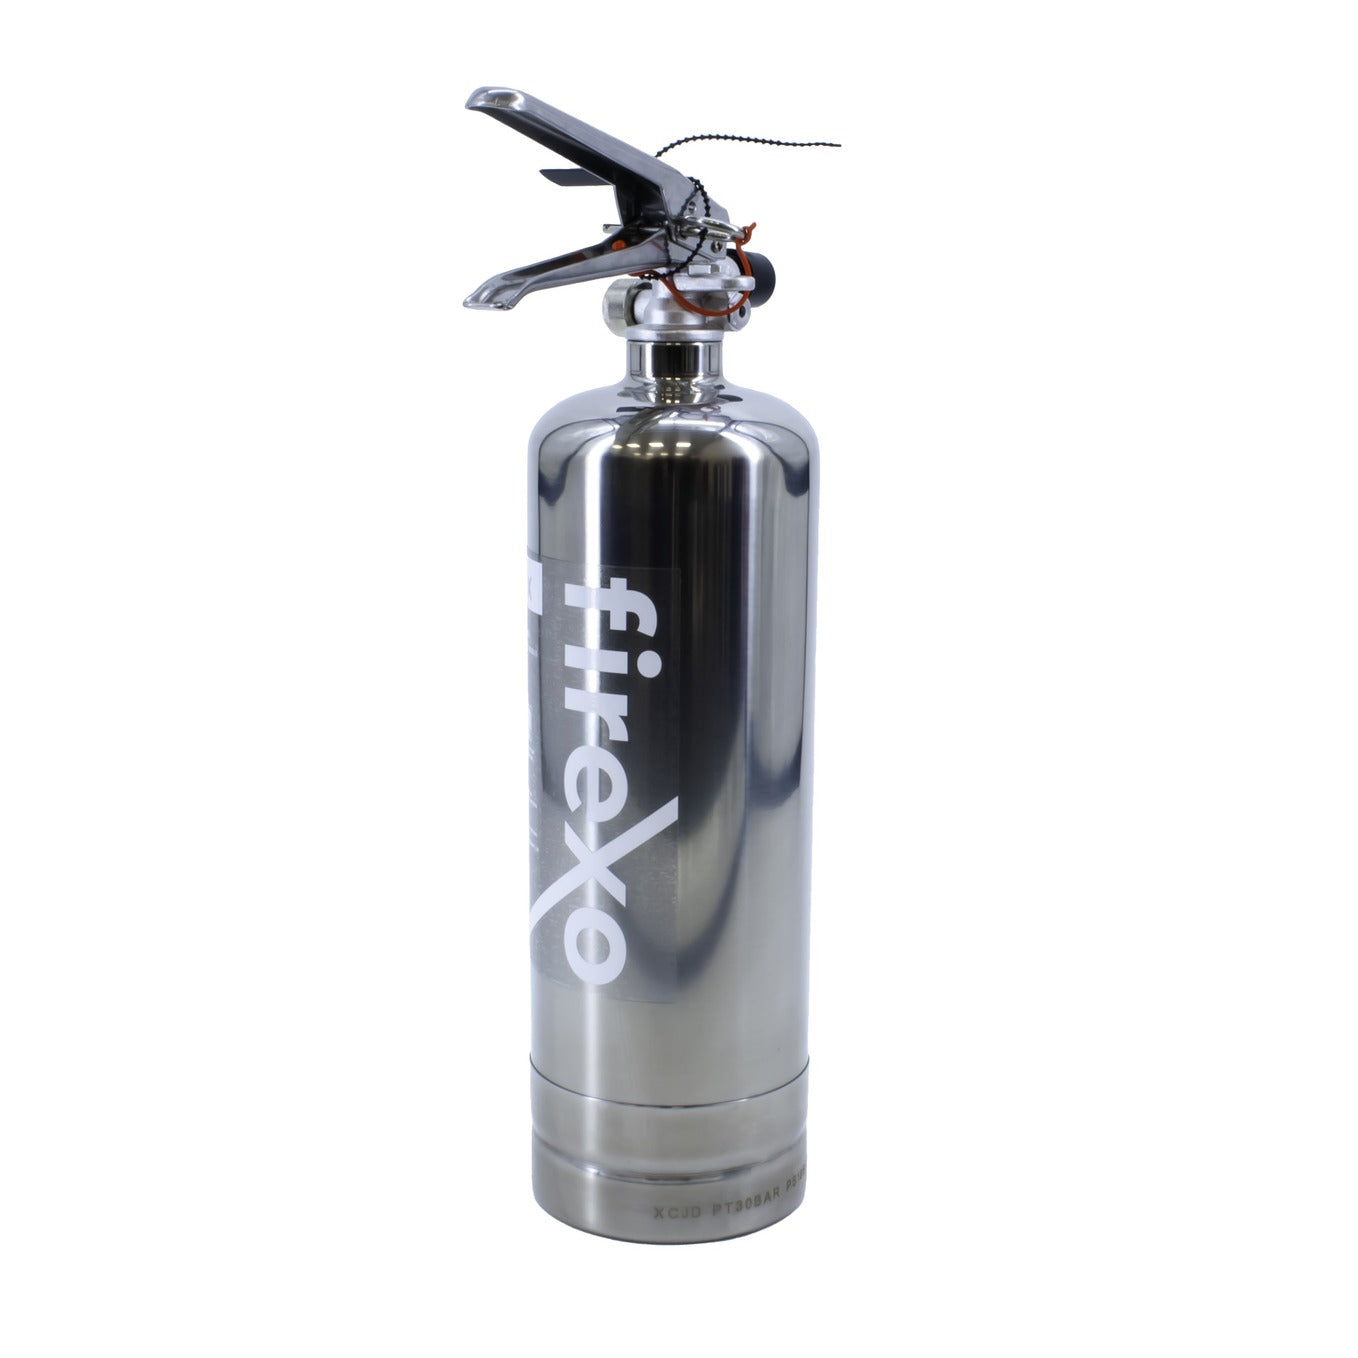 Firexo Stainless Steel 2 Litre Fire Extinguisher